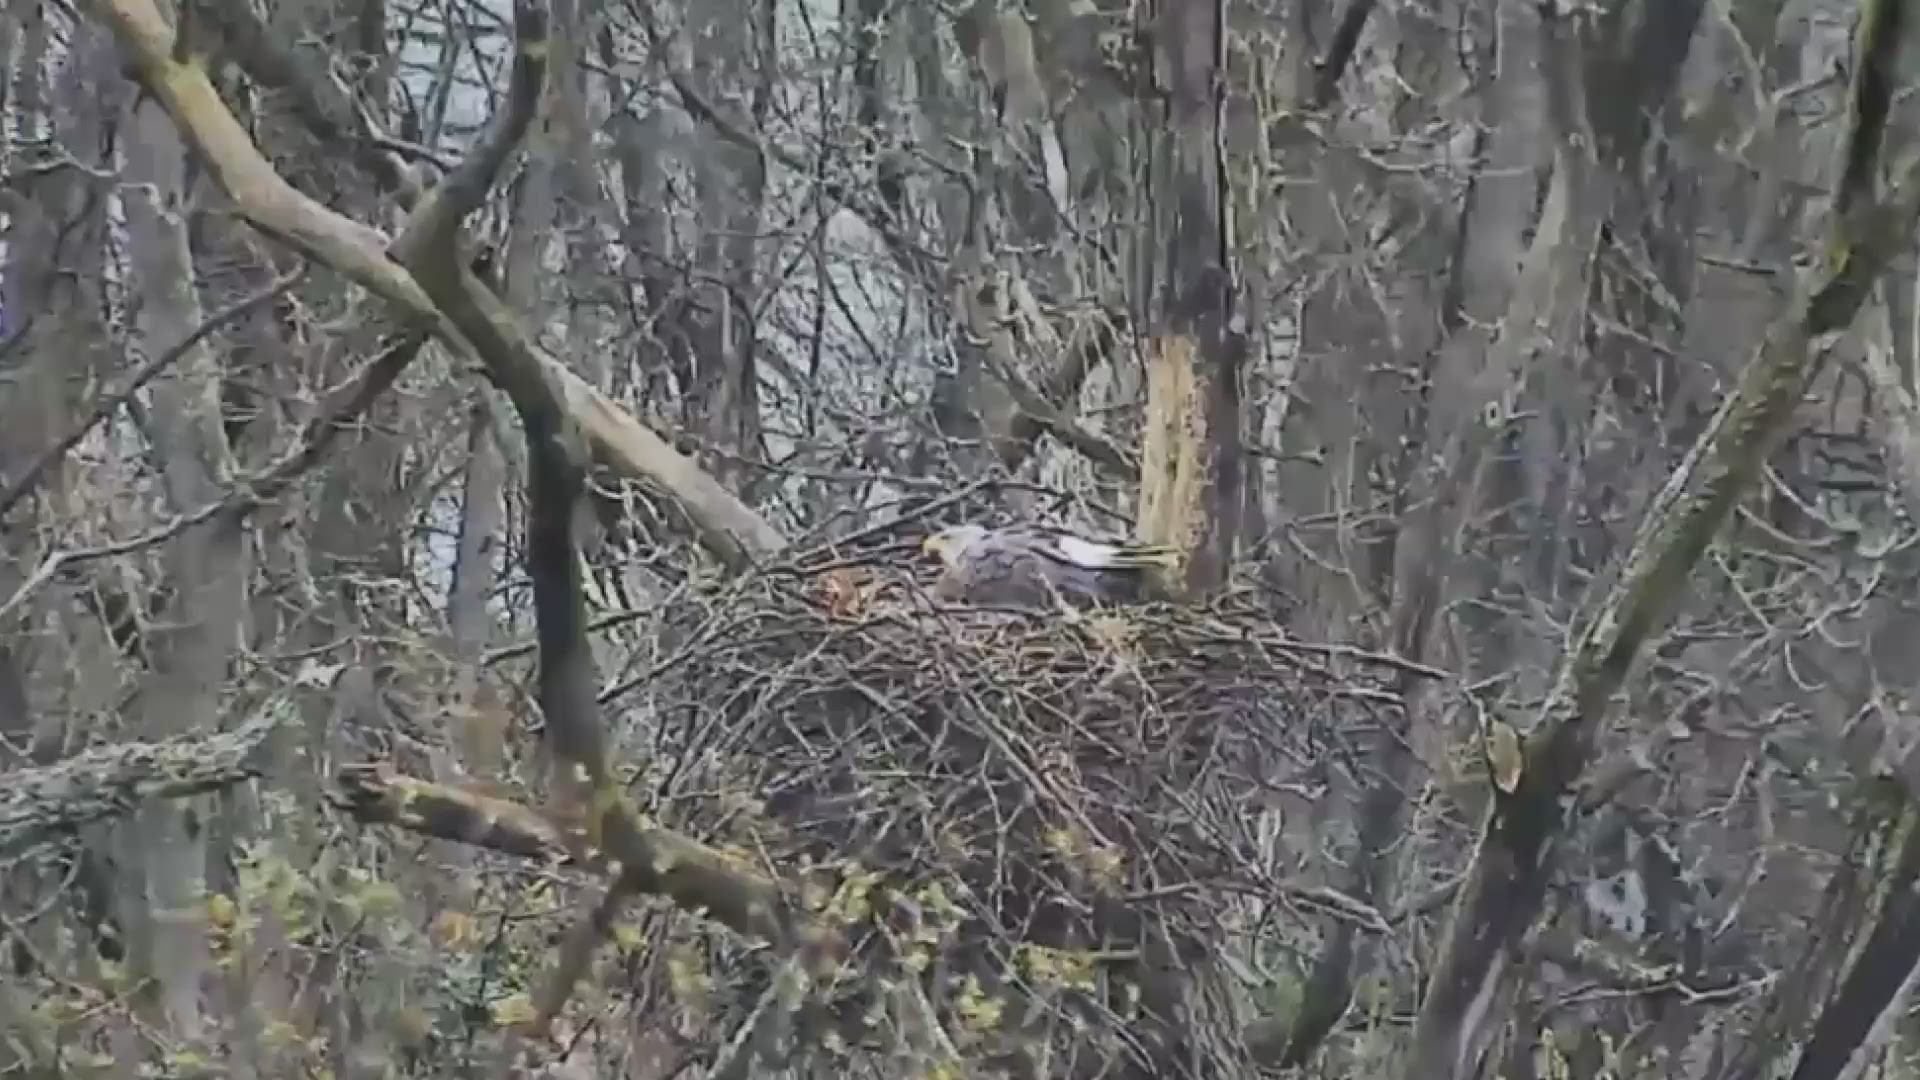 An eaglet has hatched in a bald eagle nest at the Rocky River Reservation. Park officials tell 3News these eagles have raised triplets the last two years in a row.